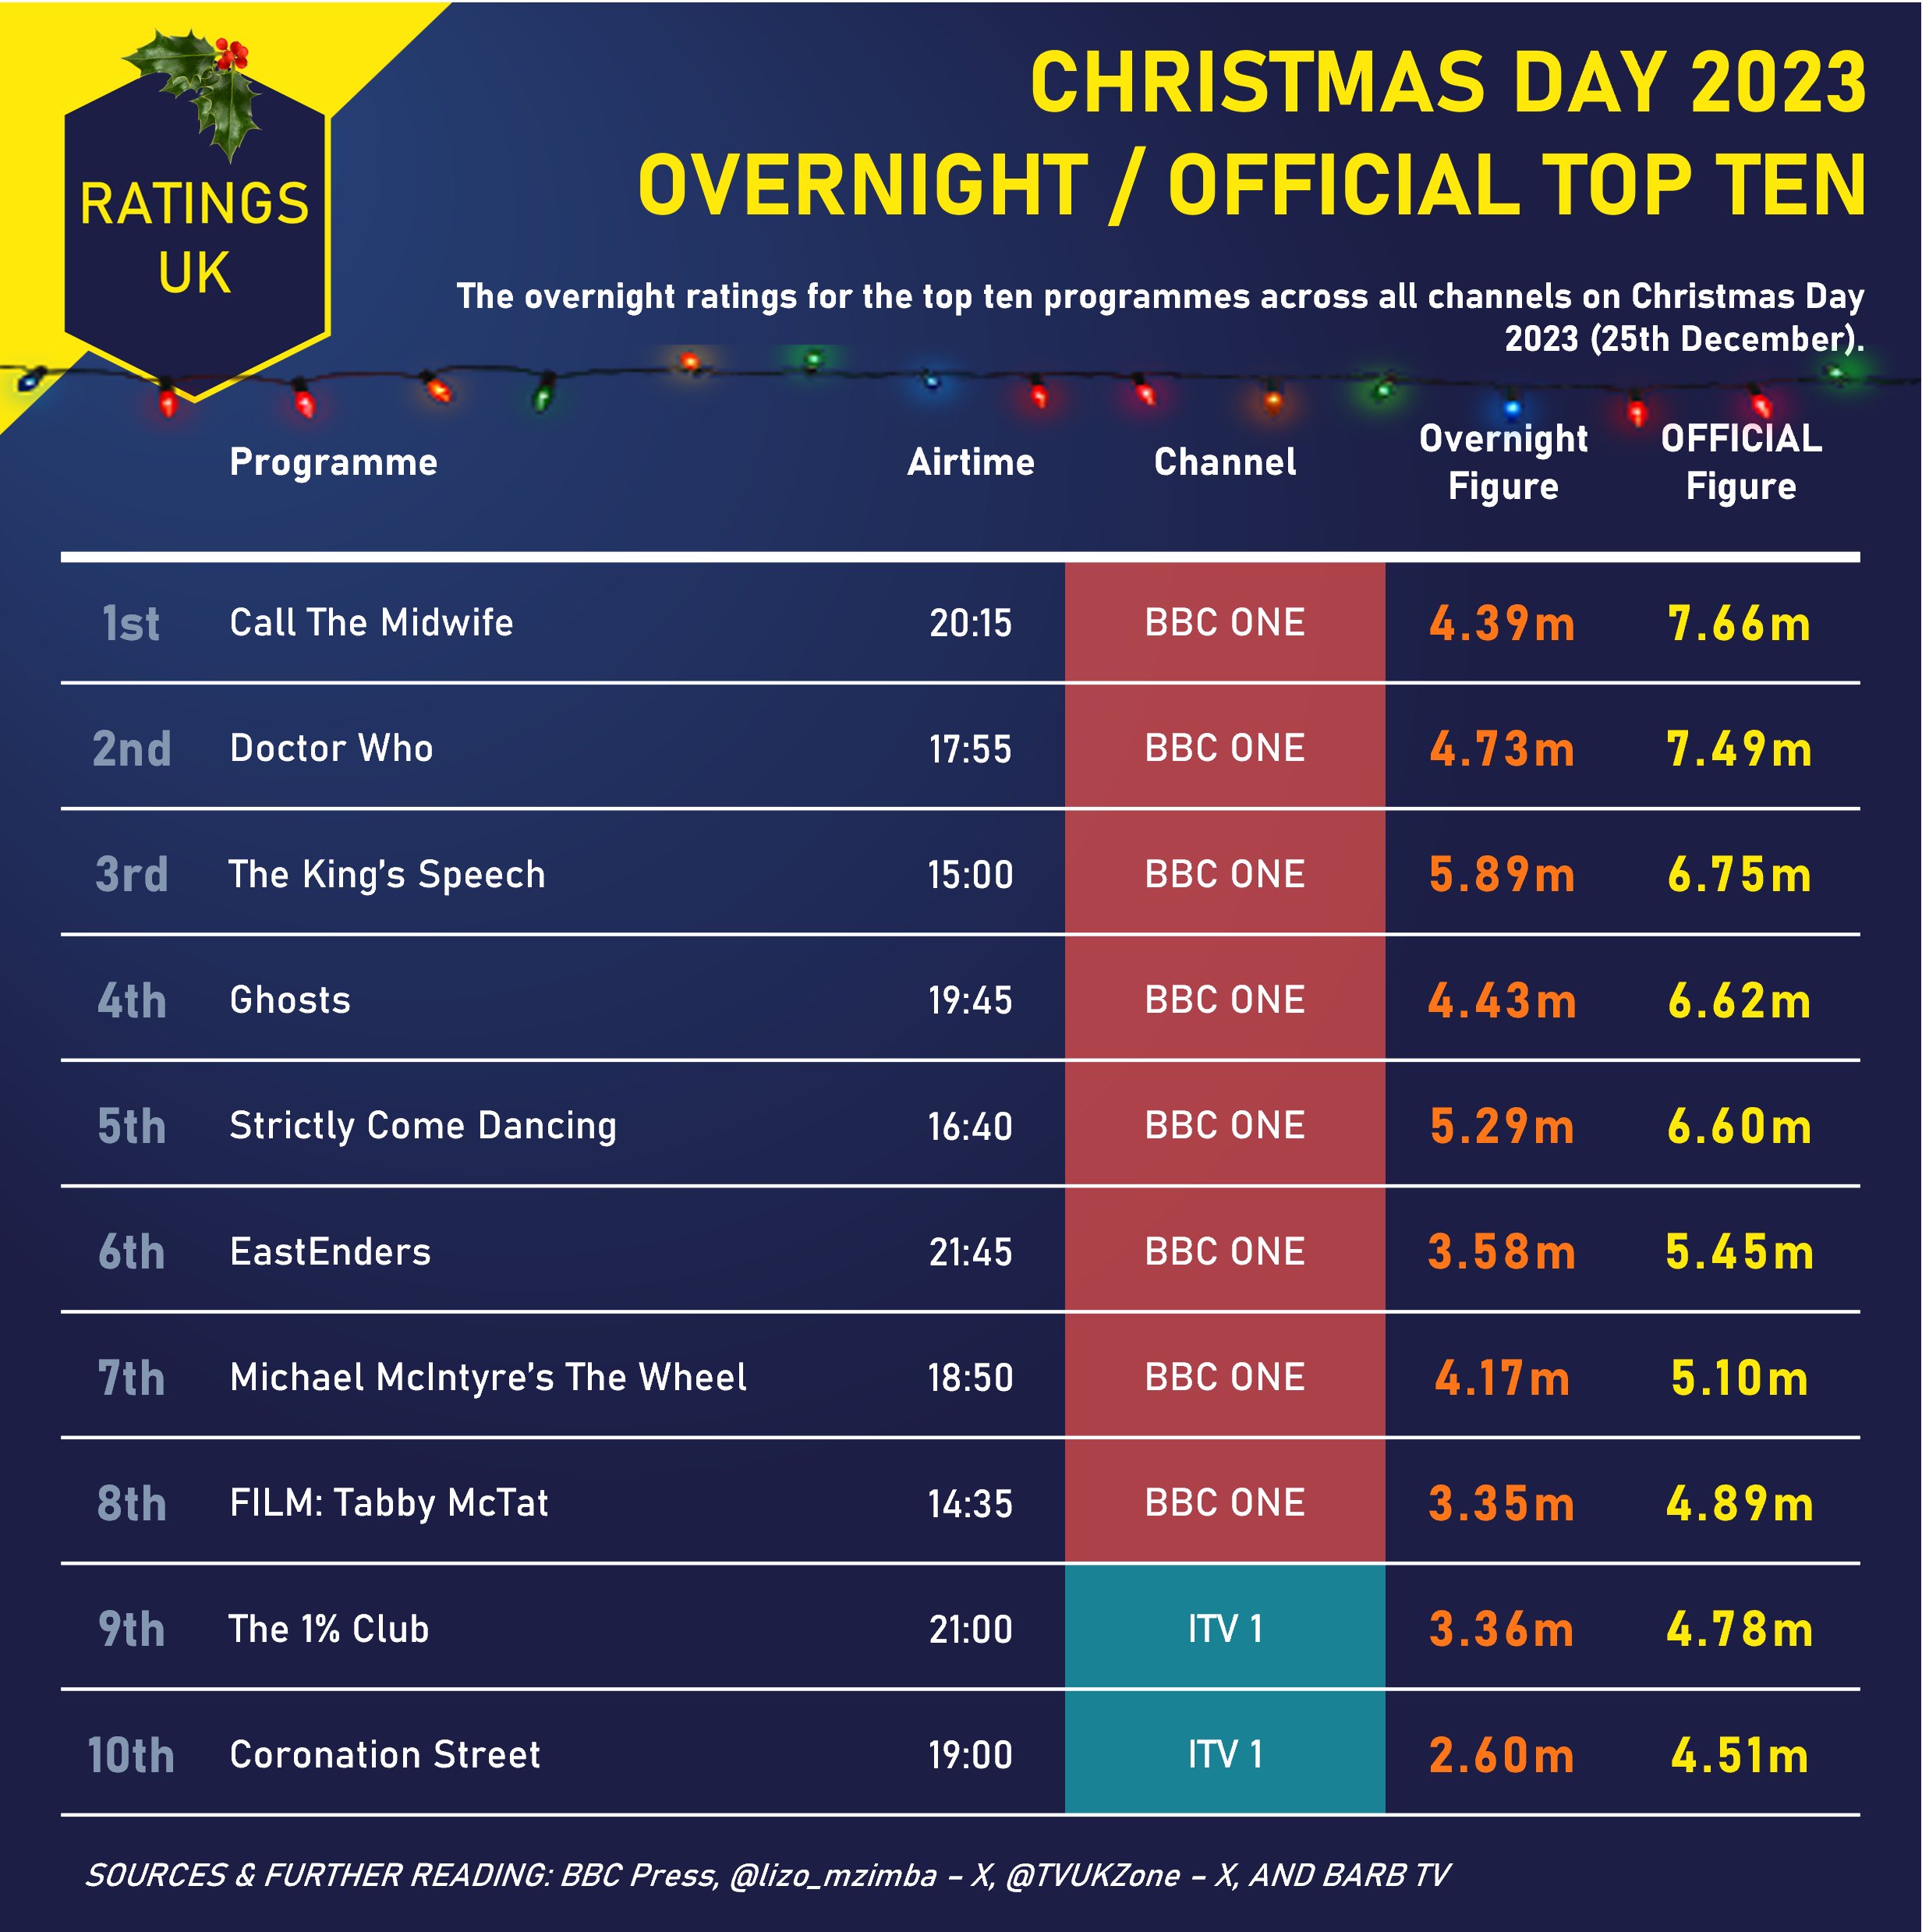 A chart shows the top ten shows on Christmas Day according to their official audiences according to BARB. Their overnight audience is also shown.